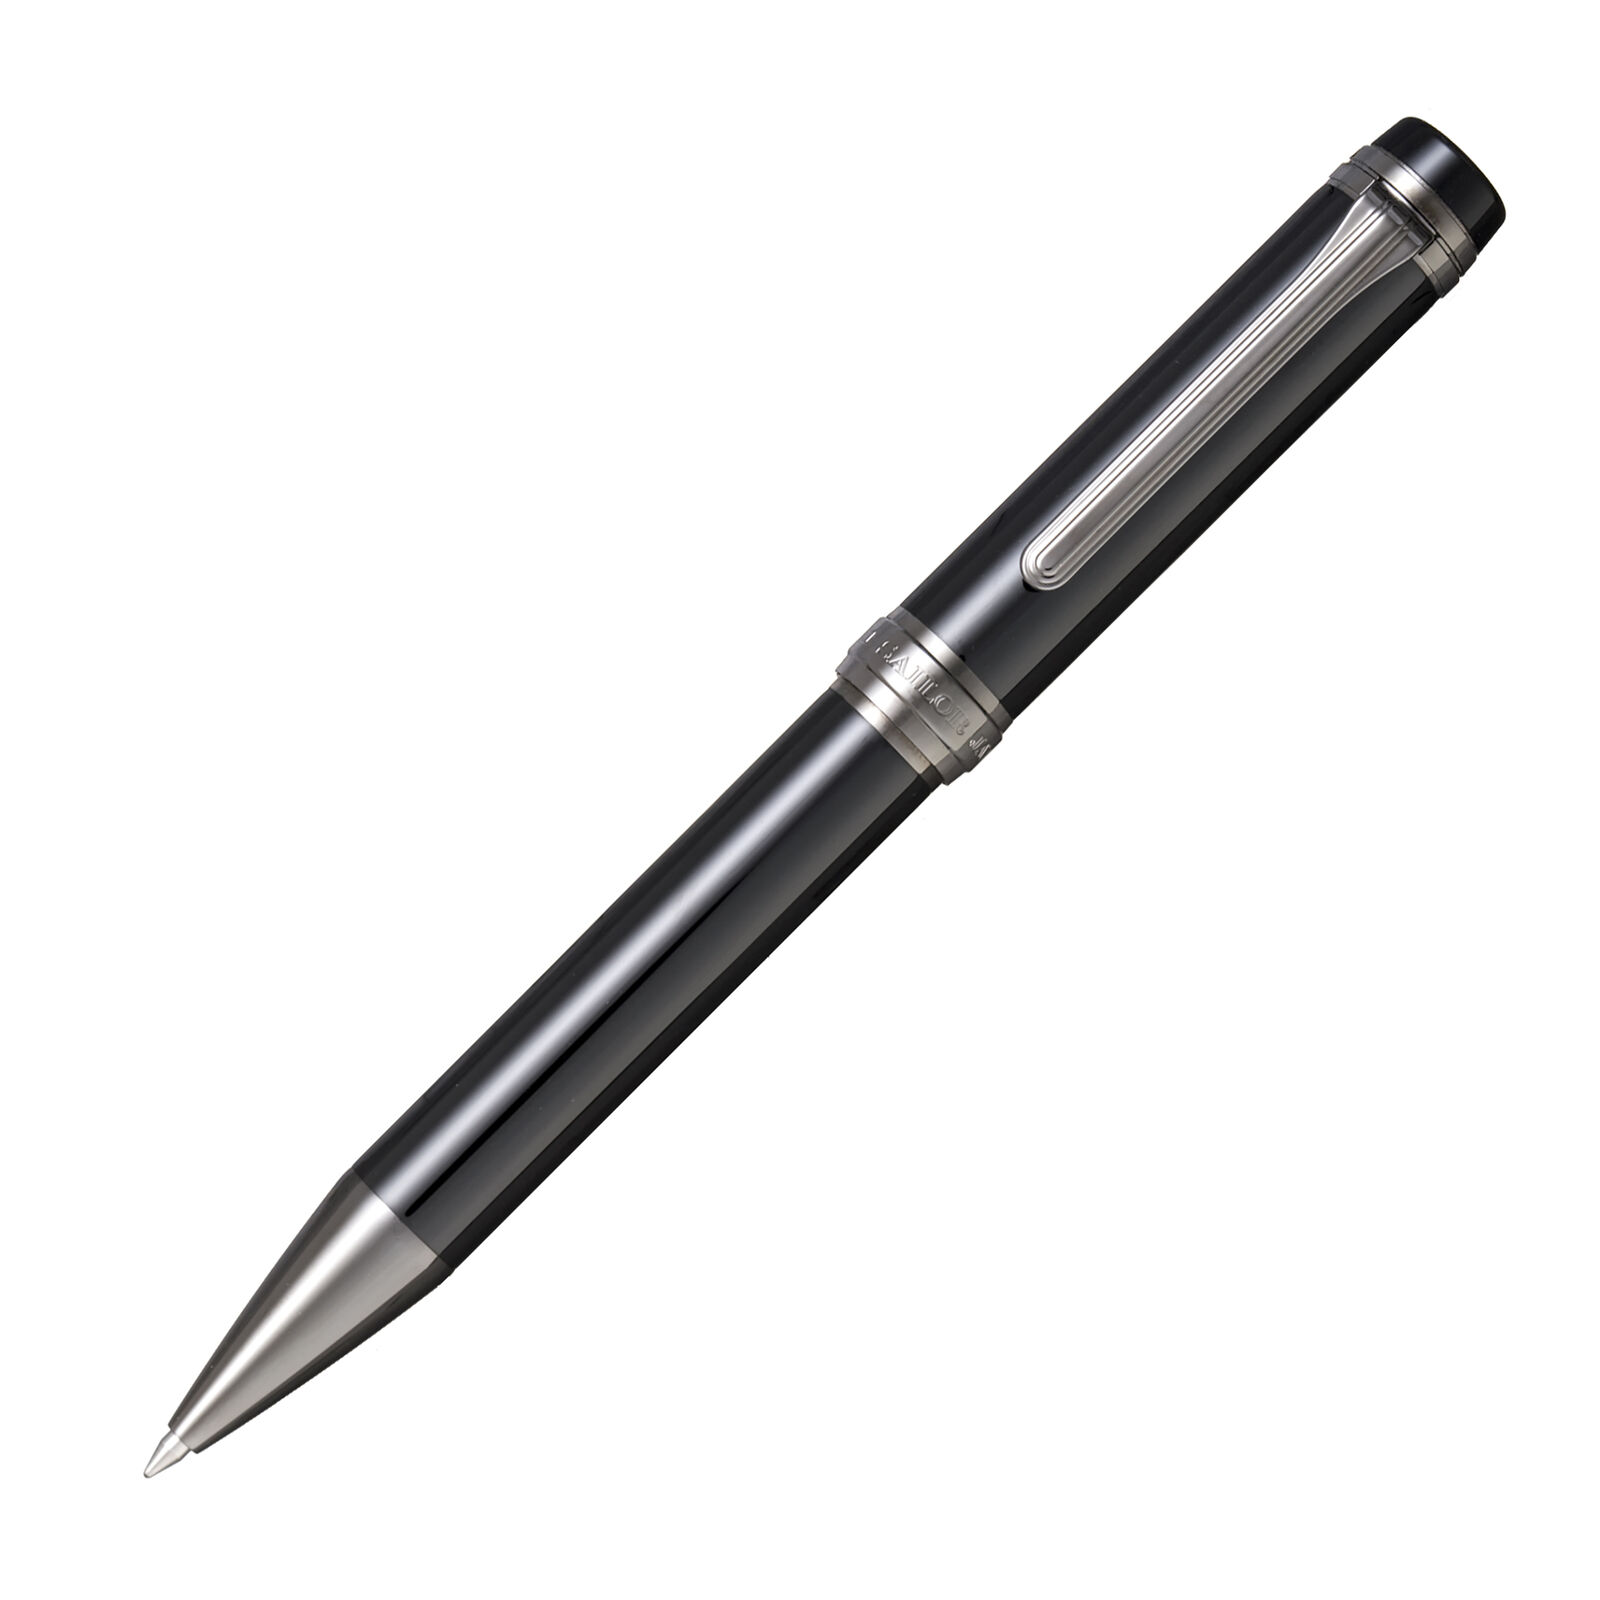 Sailor Cylint Ballpoint Pen in Black Stainless Steel with Silver Trim - NEW